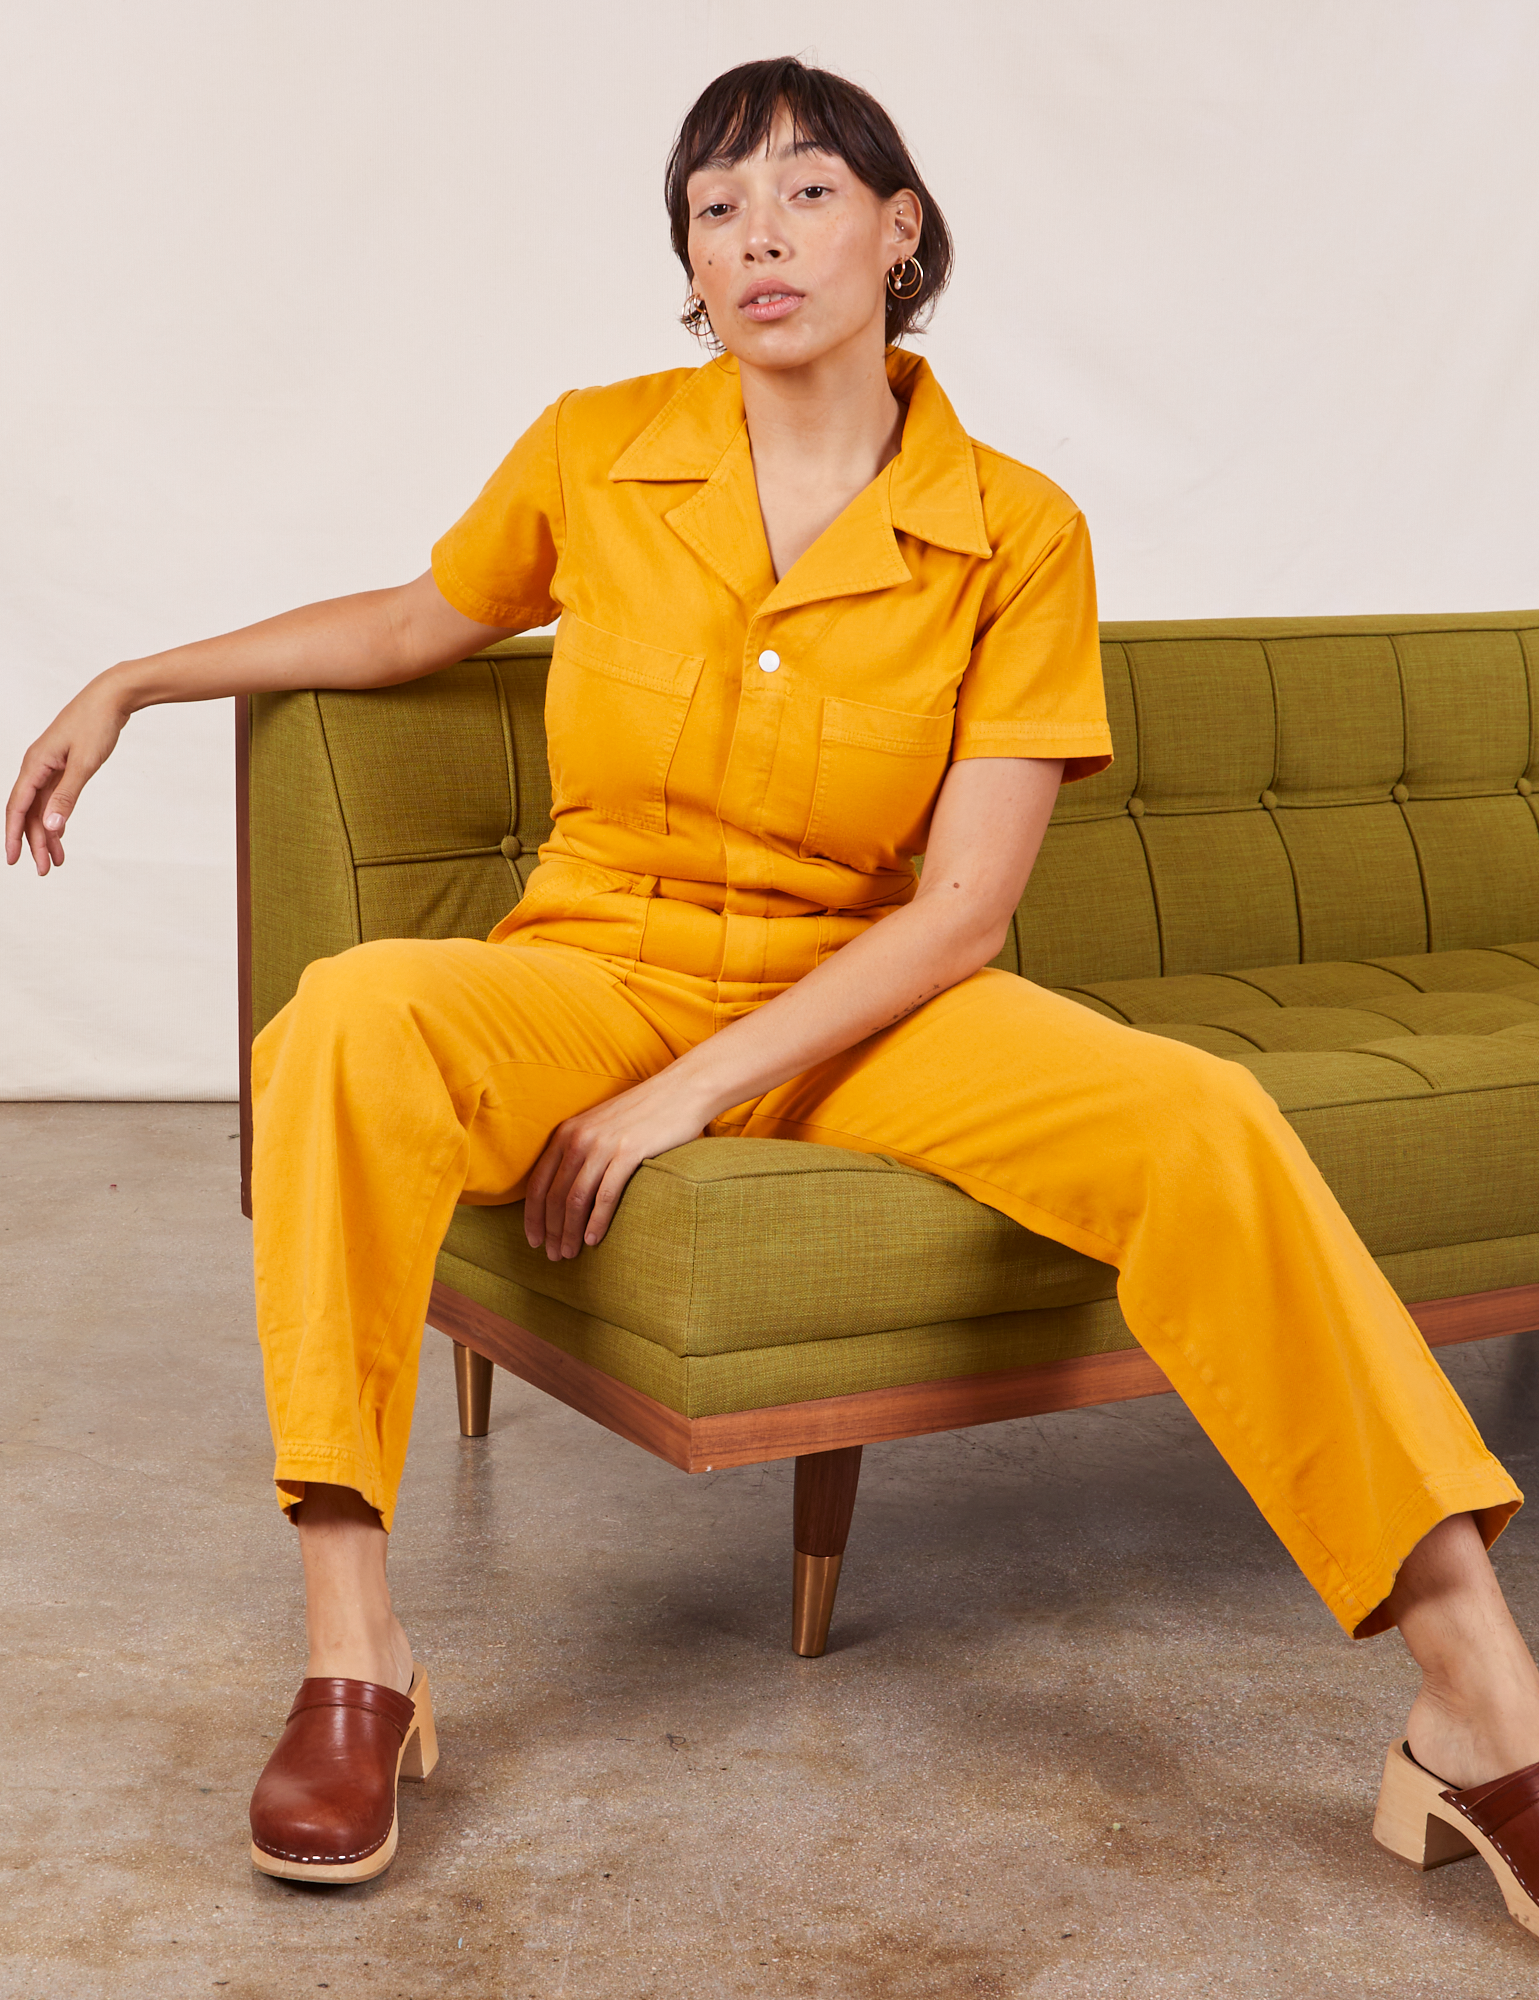 Tiara is sitting on a green couch wearing Short Sleeve Jumpsuit in Mustard Yellow